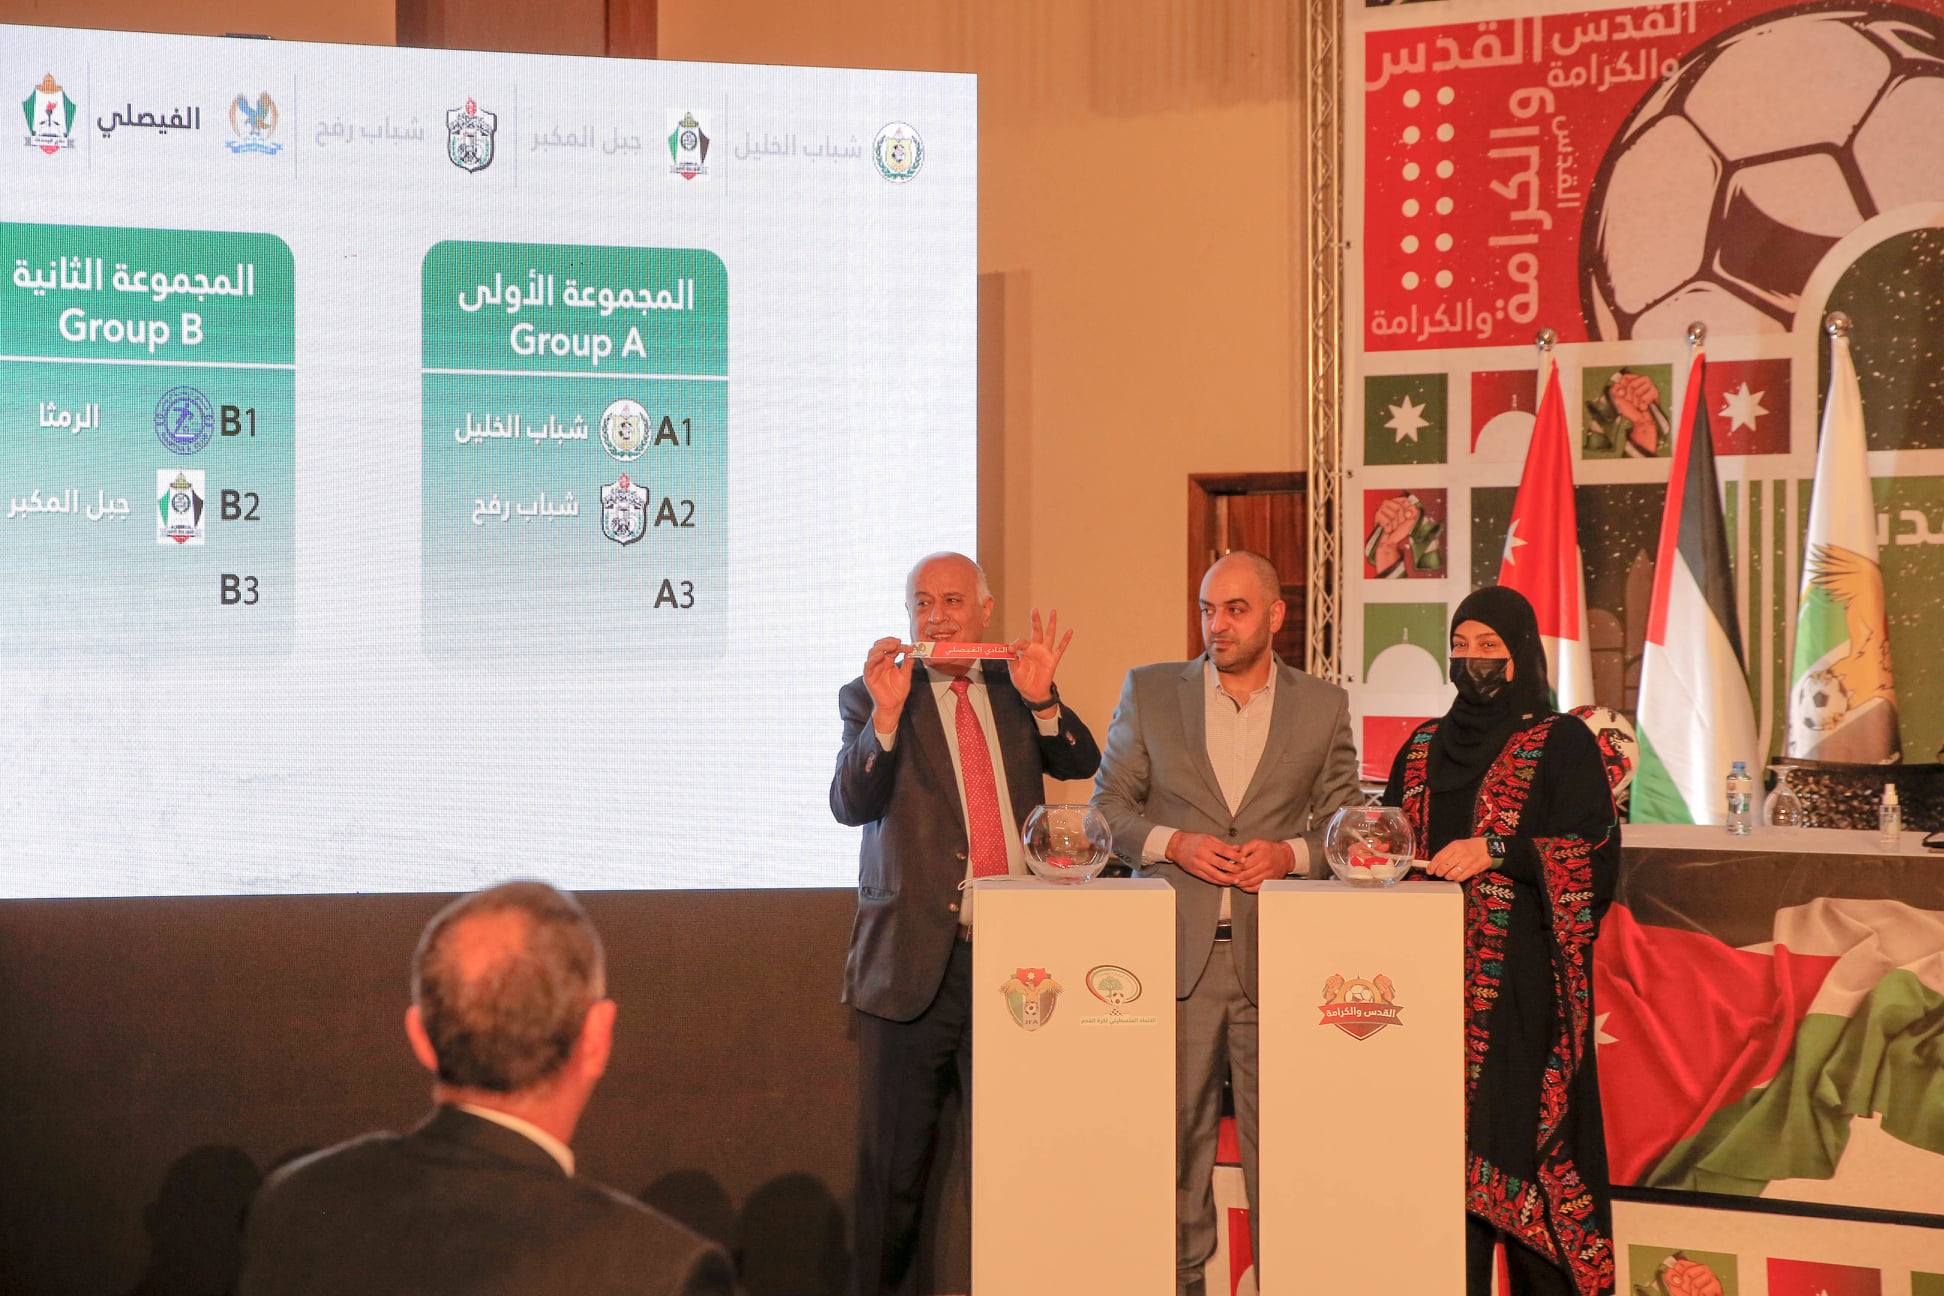 The Chairman of the Board of Directors Participates in the Draft Lottery for "Al Quds and Al Karameh" Championship